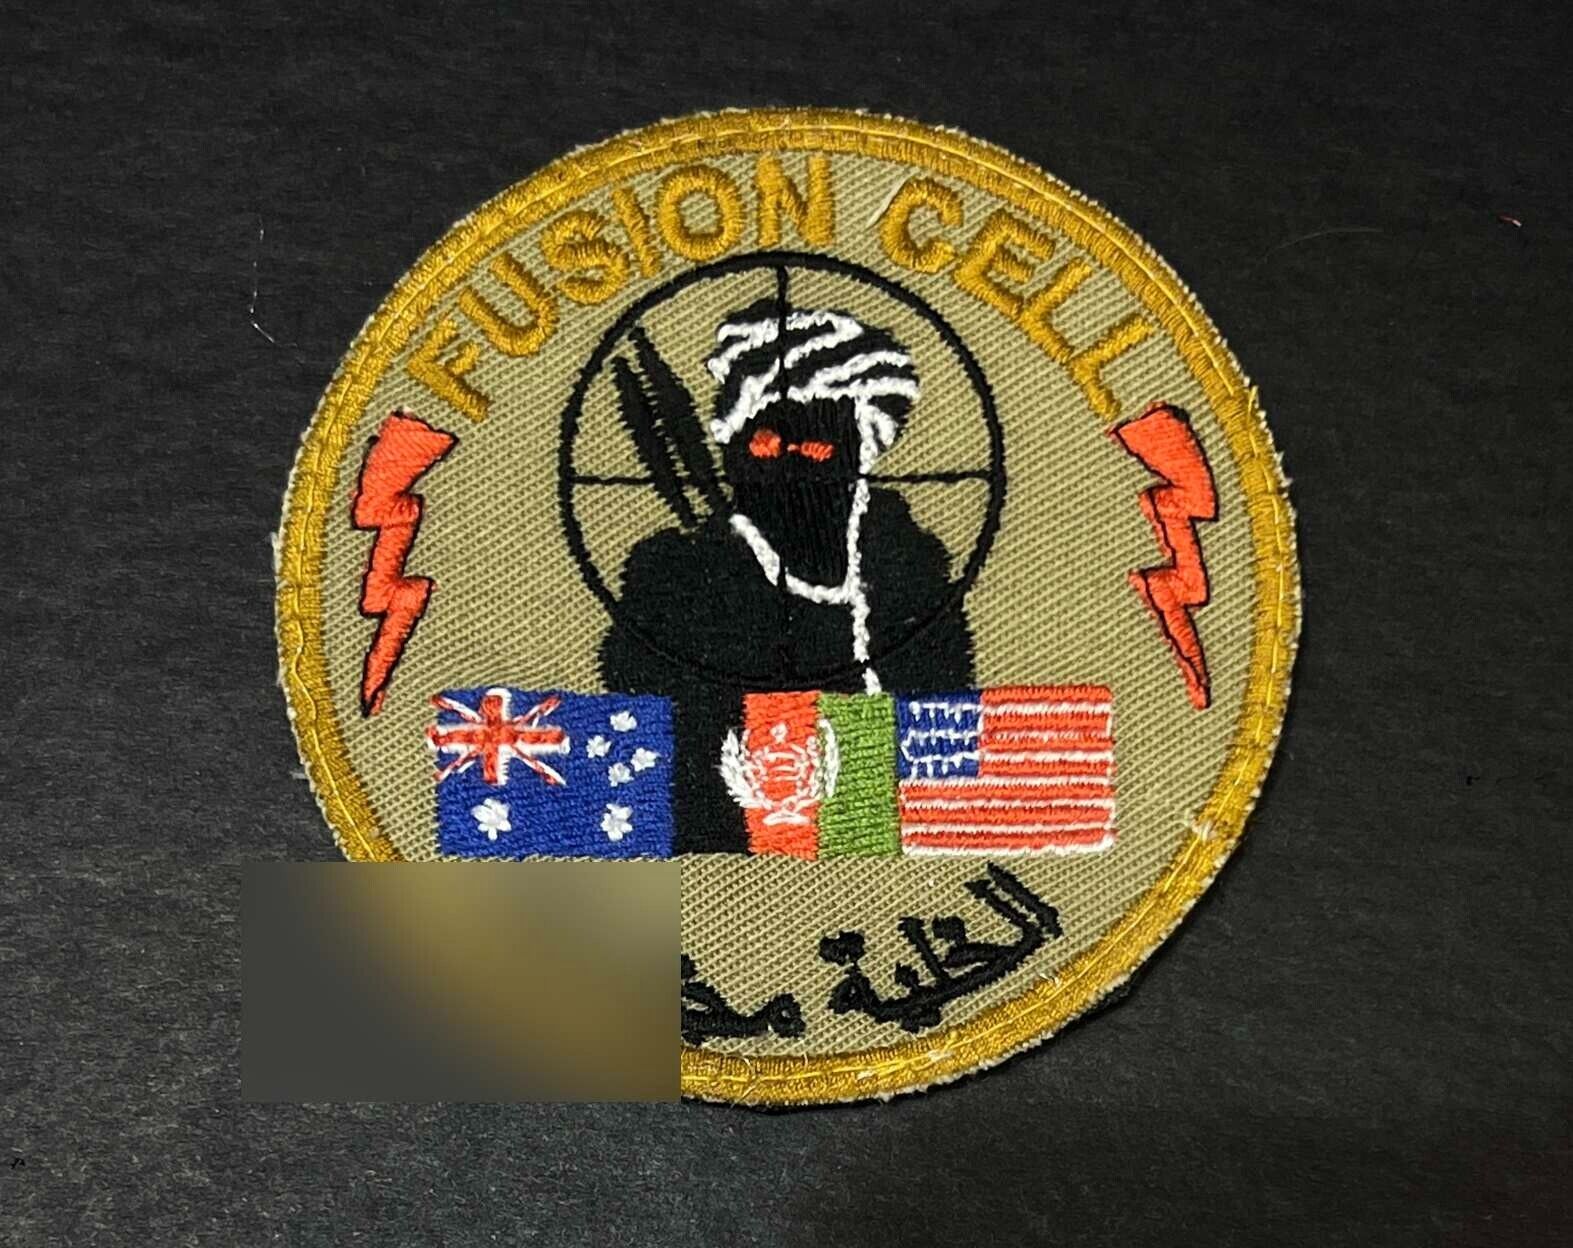 Fusion Cell  Special Forces in Afghanistan  Patch  Green Beret Genuine USSF